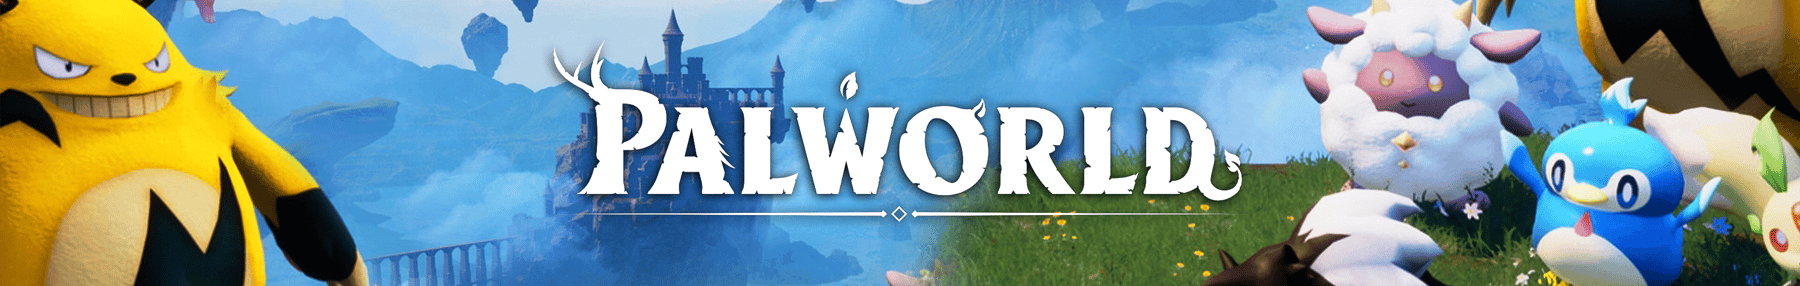 Palworld Release Date Banner